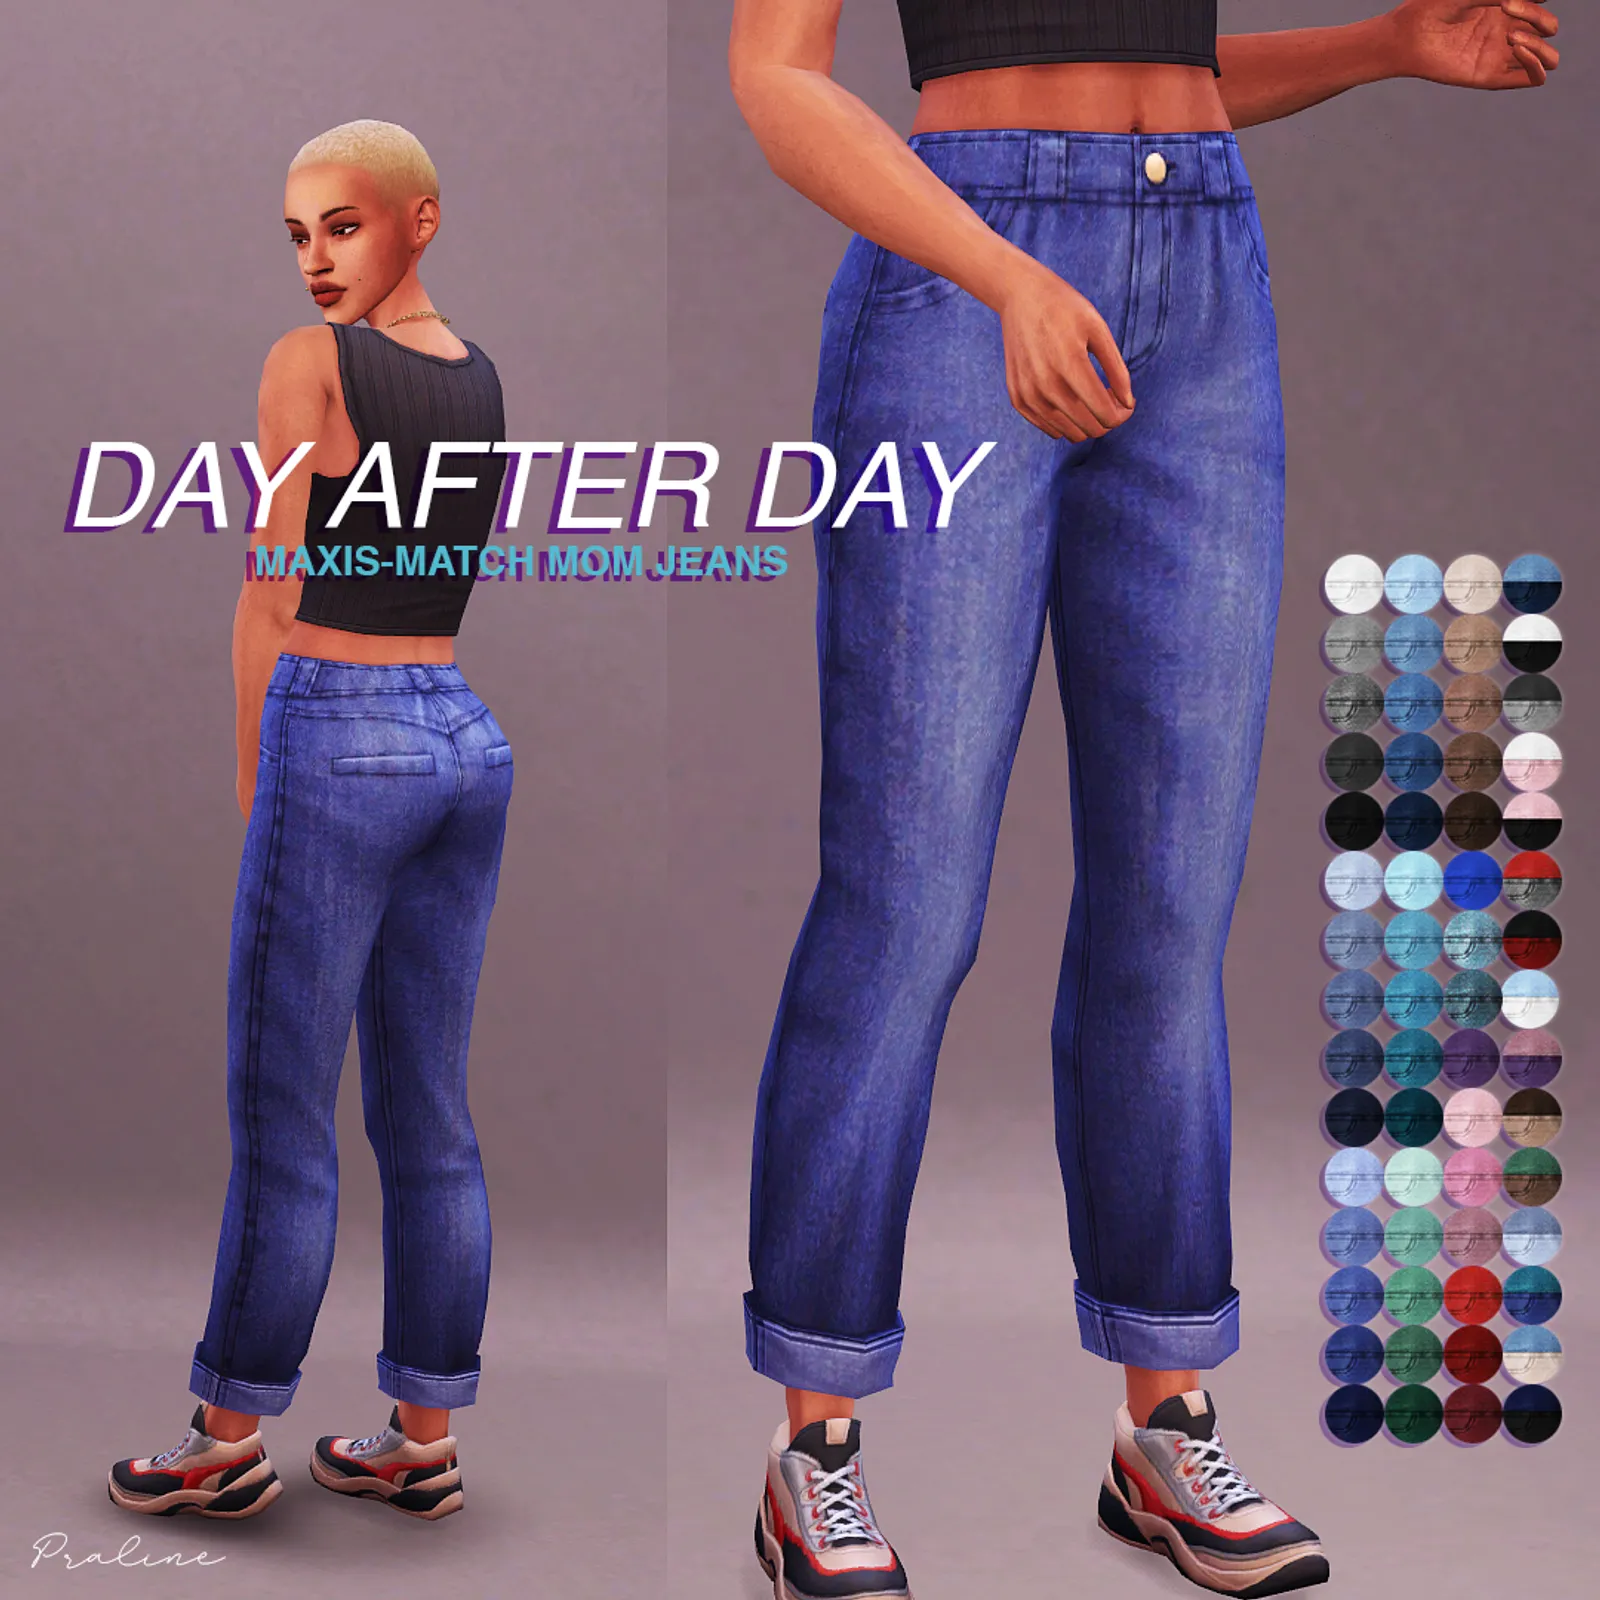 DAY AFTER DAY MM Jeans